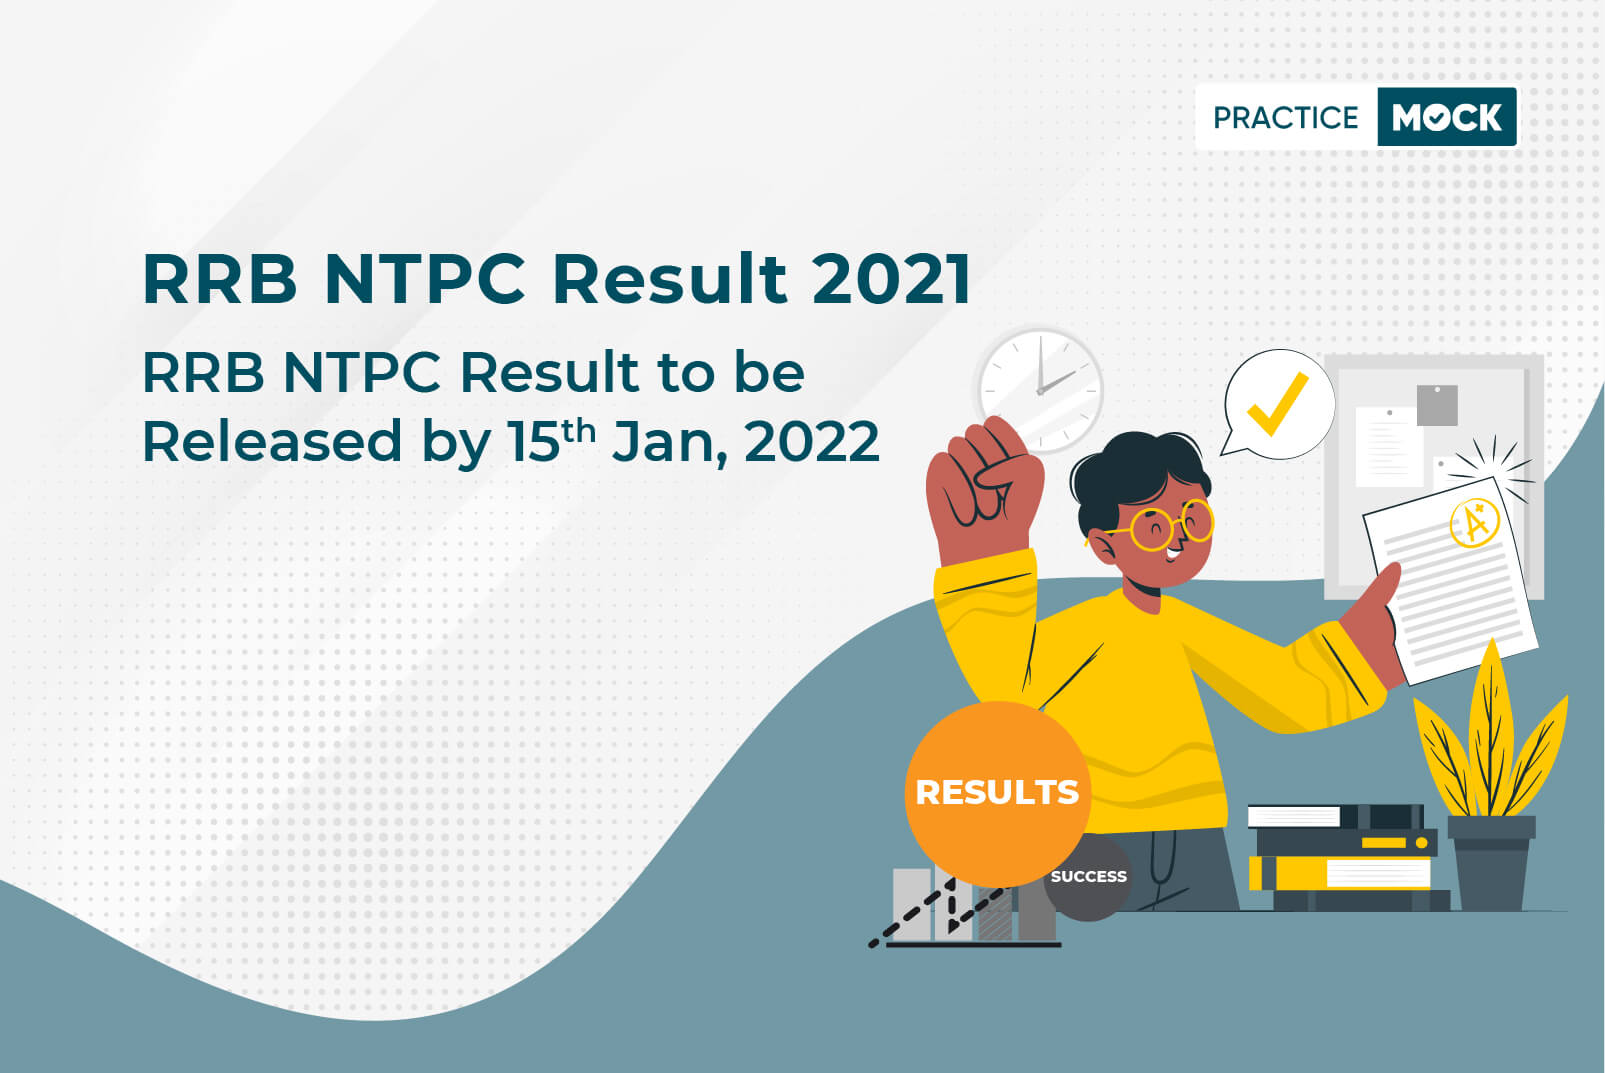 RRB NTPC Result 2021: RRB NTPC Result to be Released by 15th January 2022